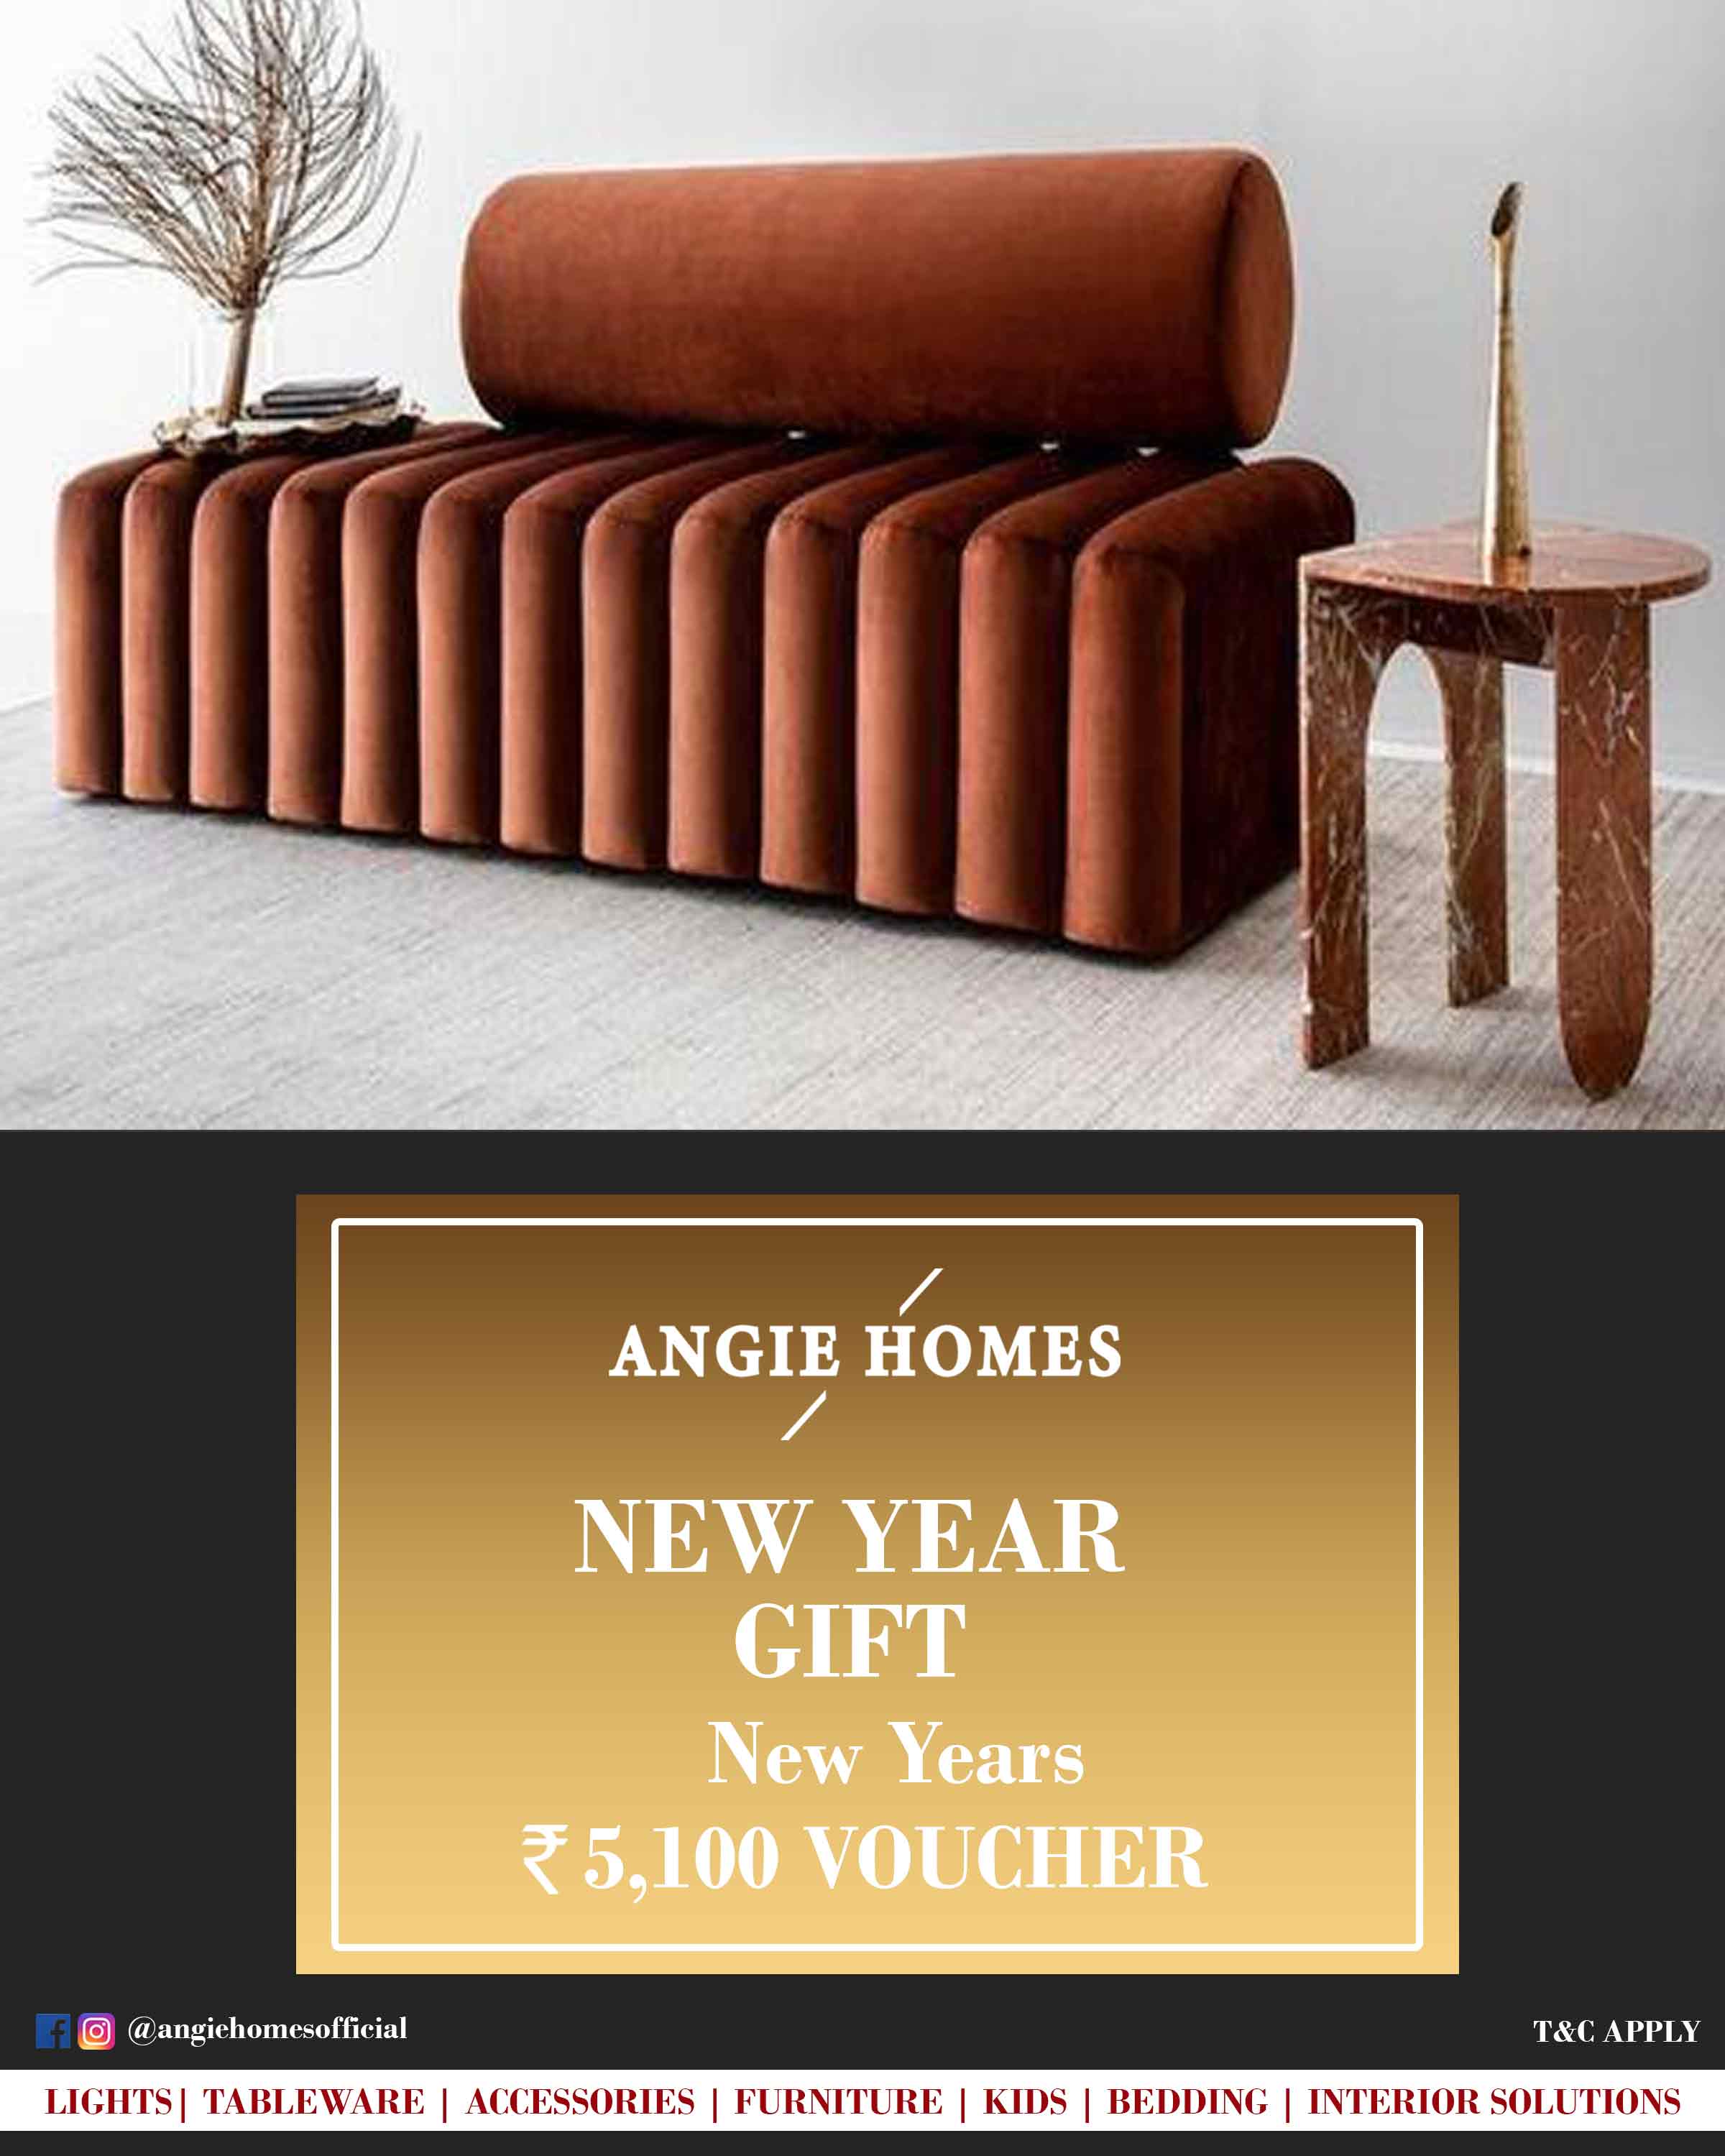 Online New Year Gift Voucher for Chaise Sofa | Furniture ANGIE HOMES